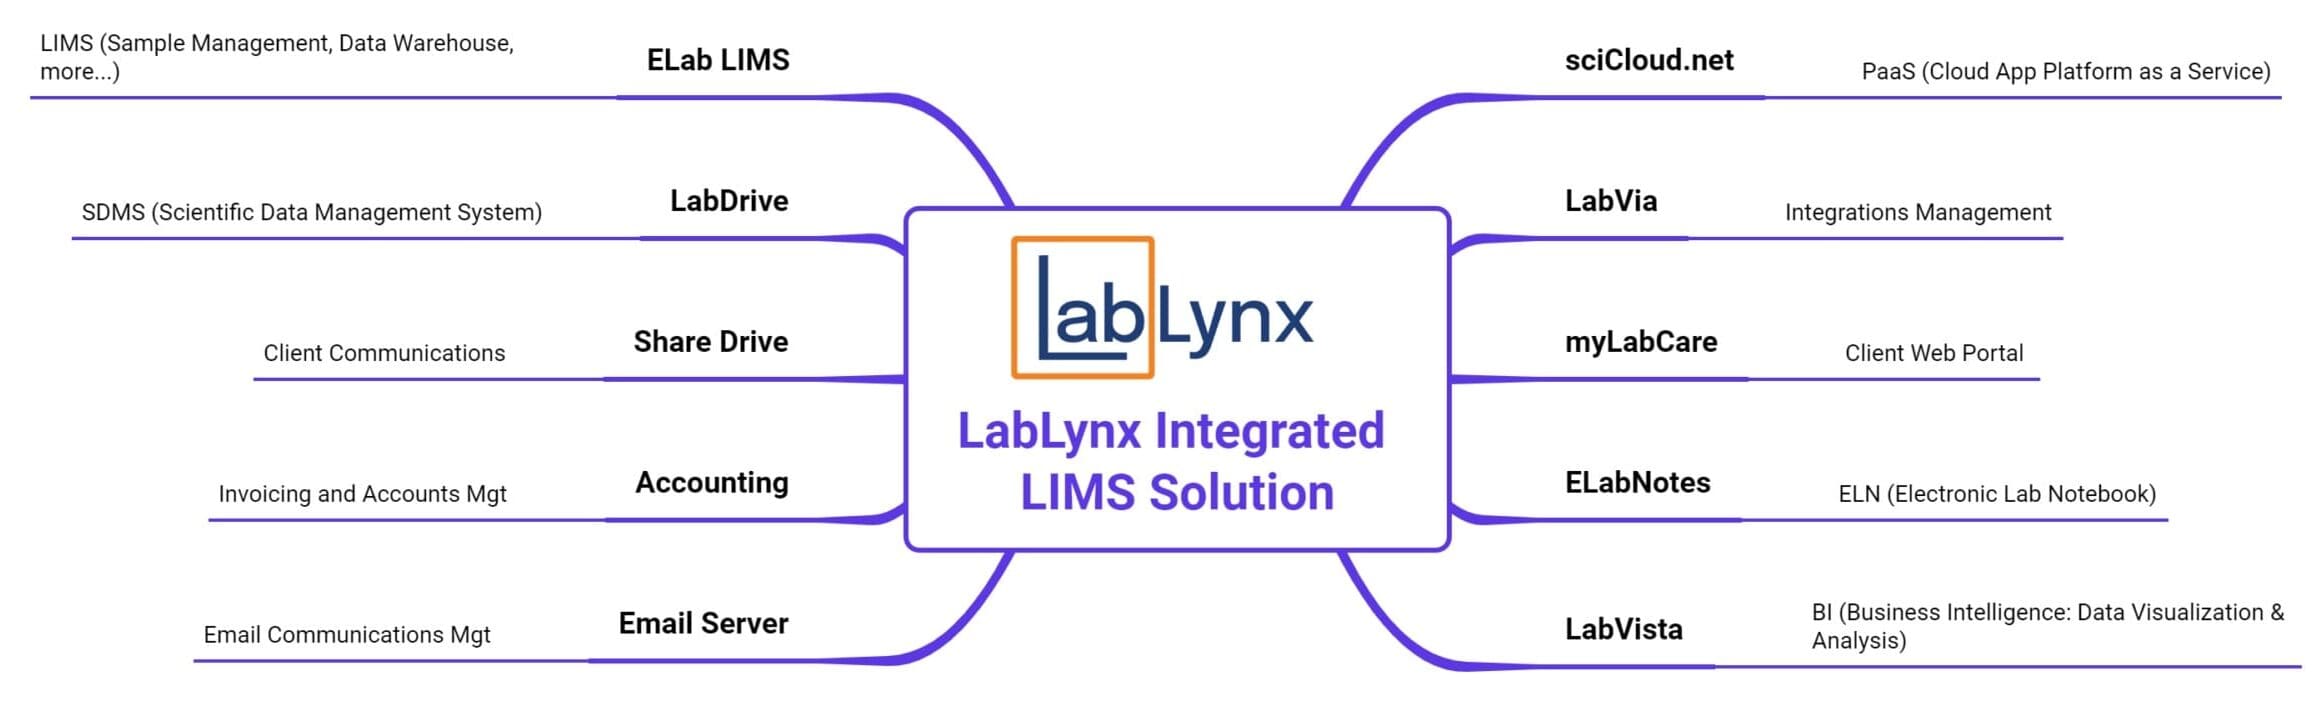 LabLynx-Integrated-LIMS-Solution